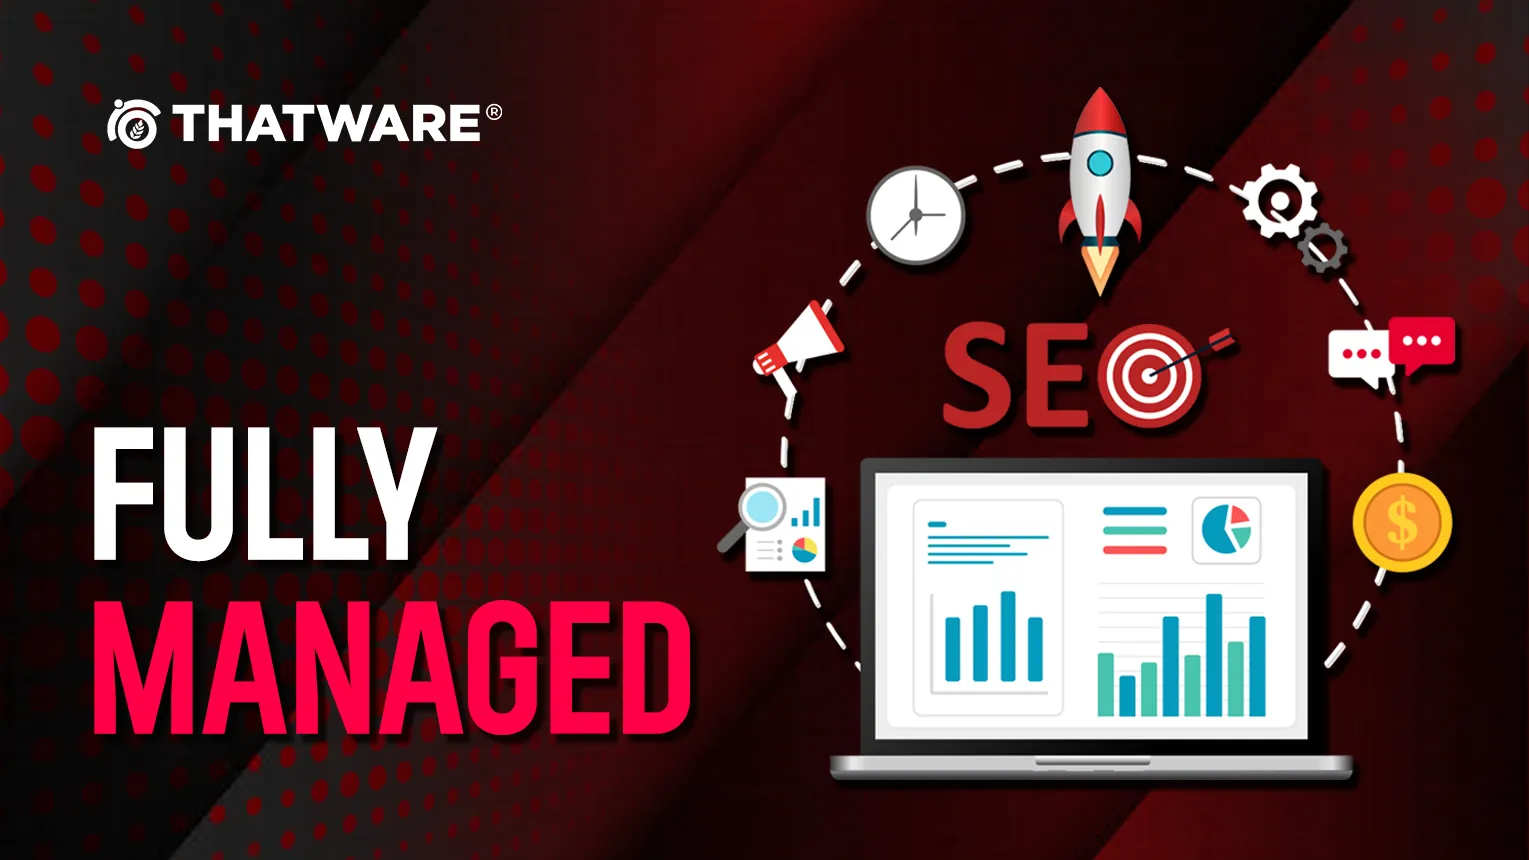 FULLY MANAGED SEO services